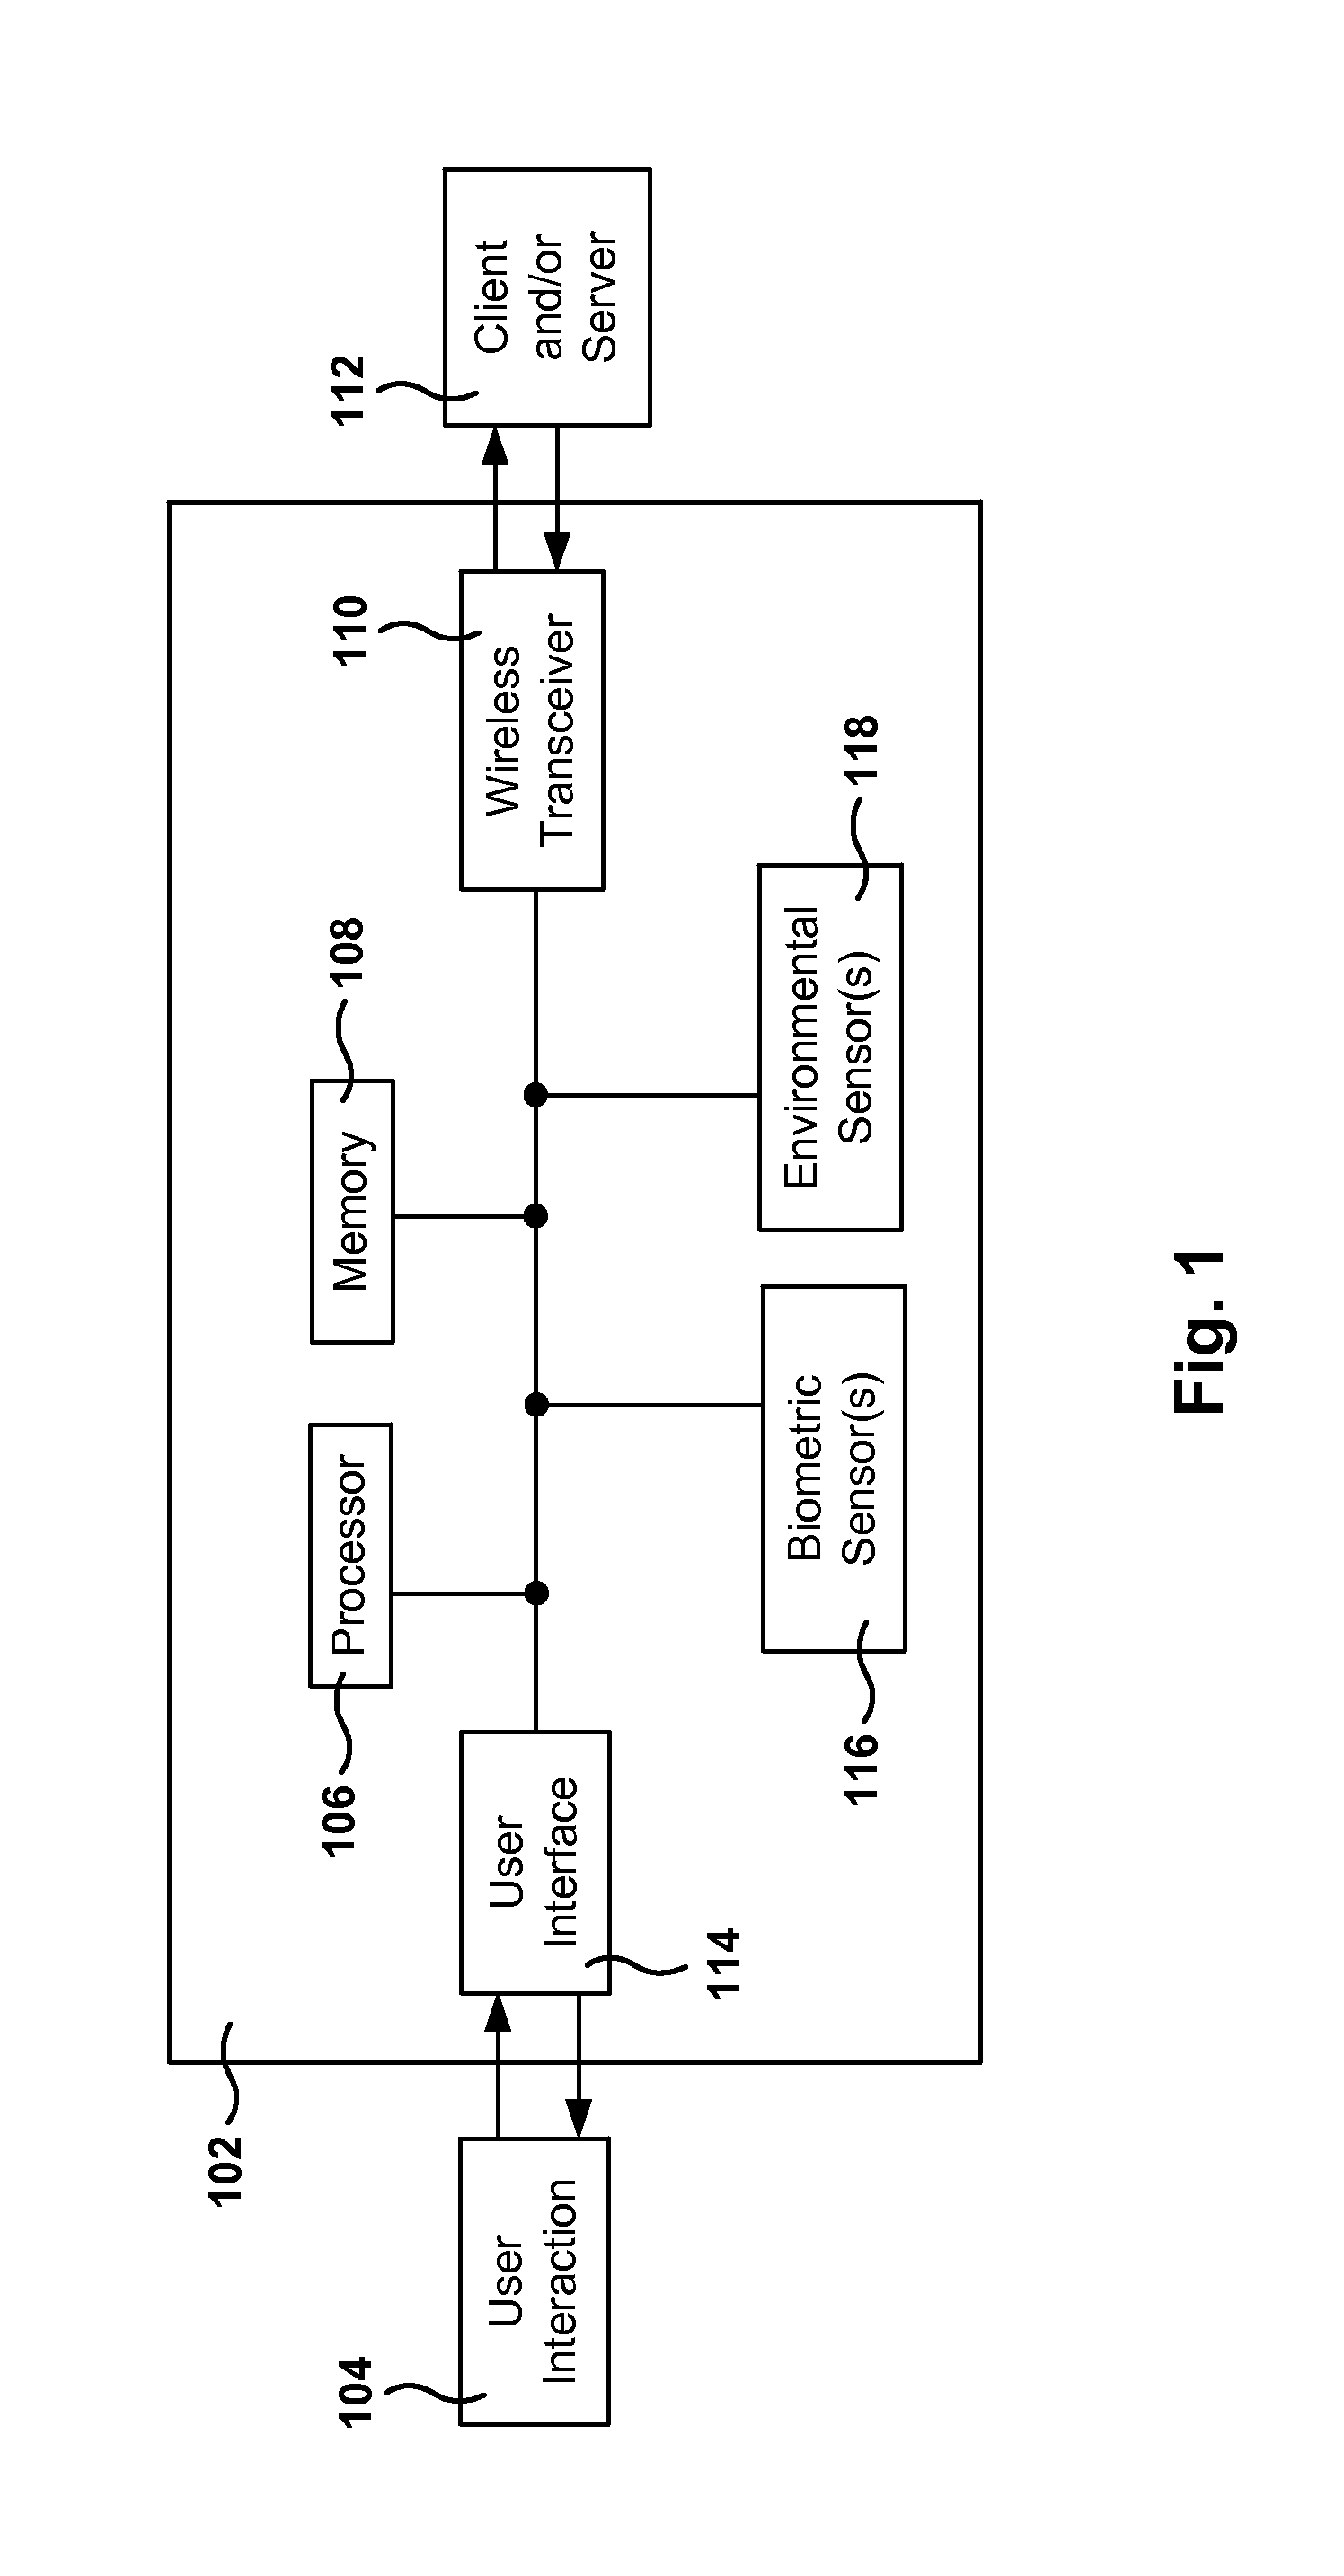 Power consumption management of display in portable device based on prediction of user input